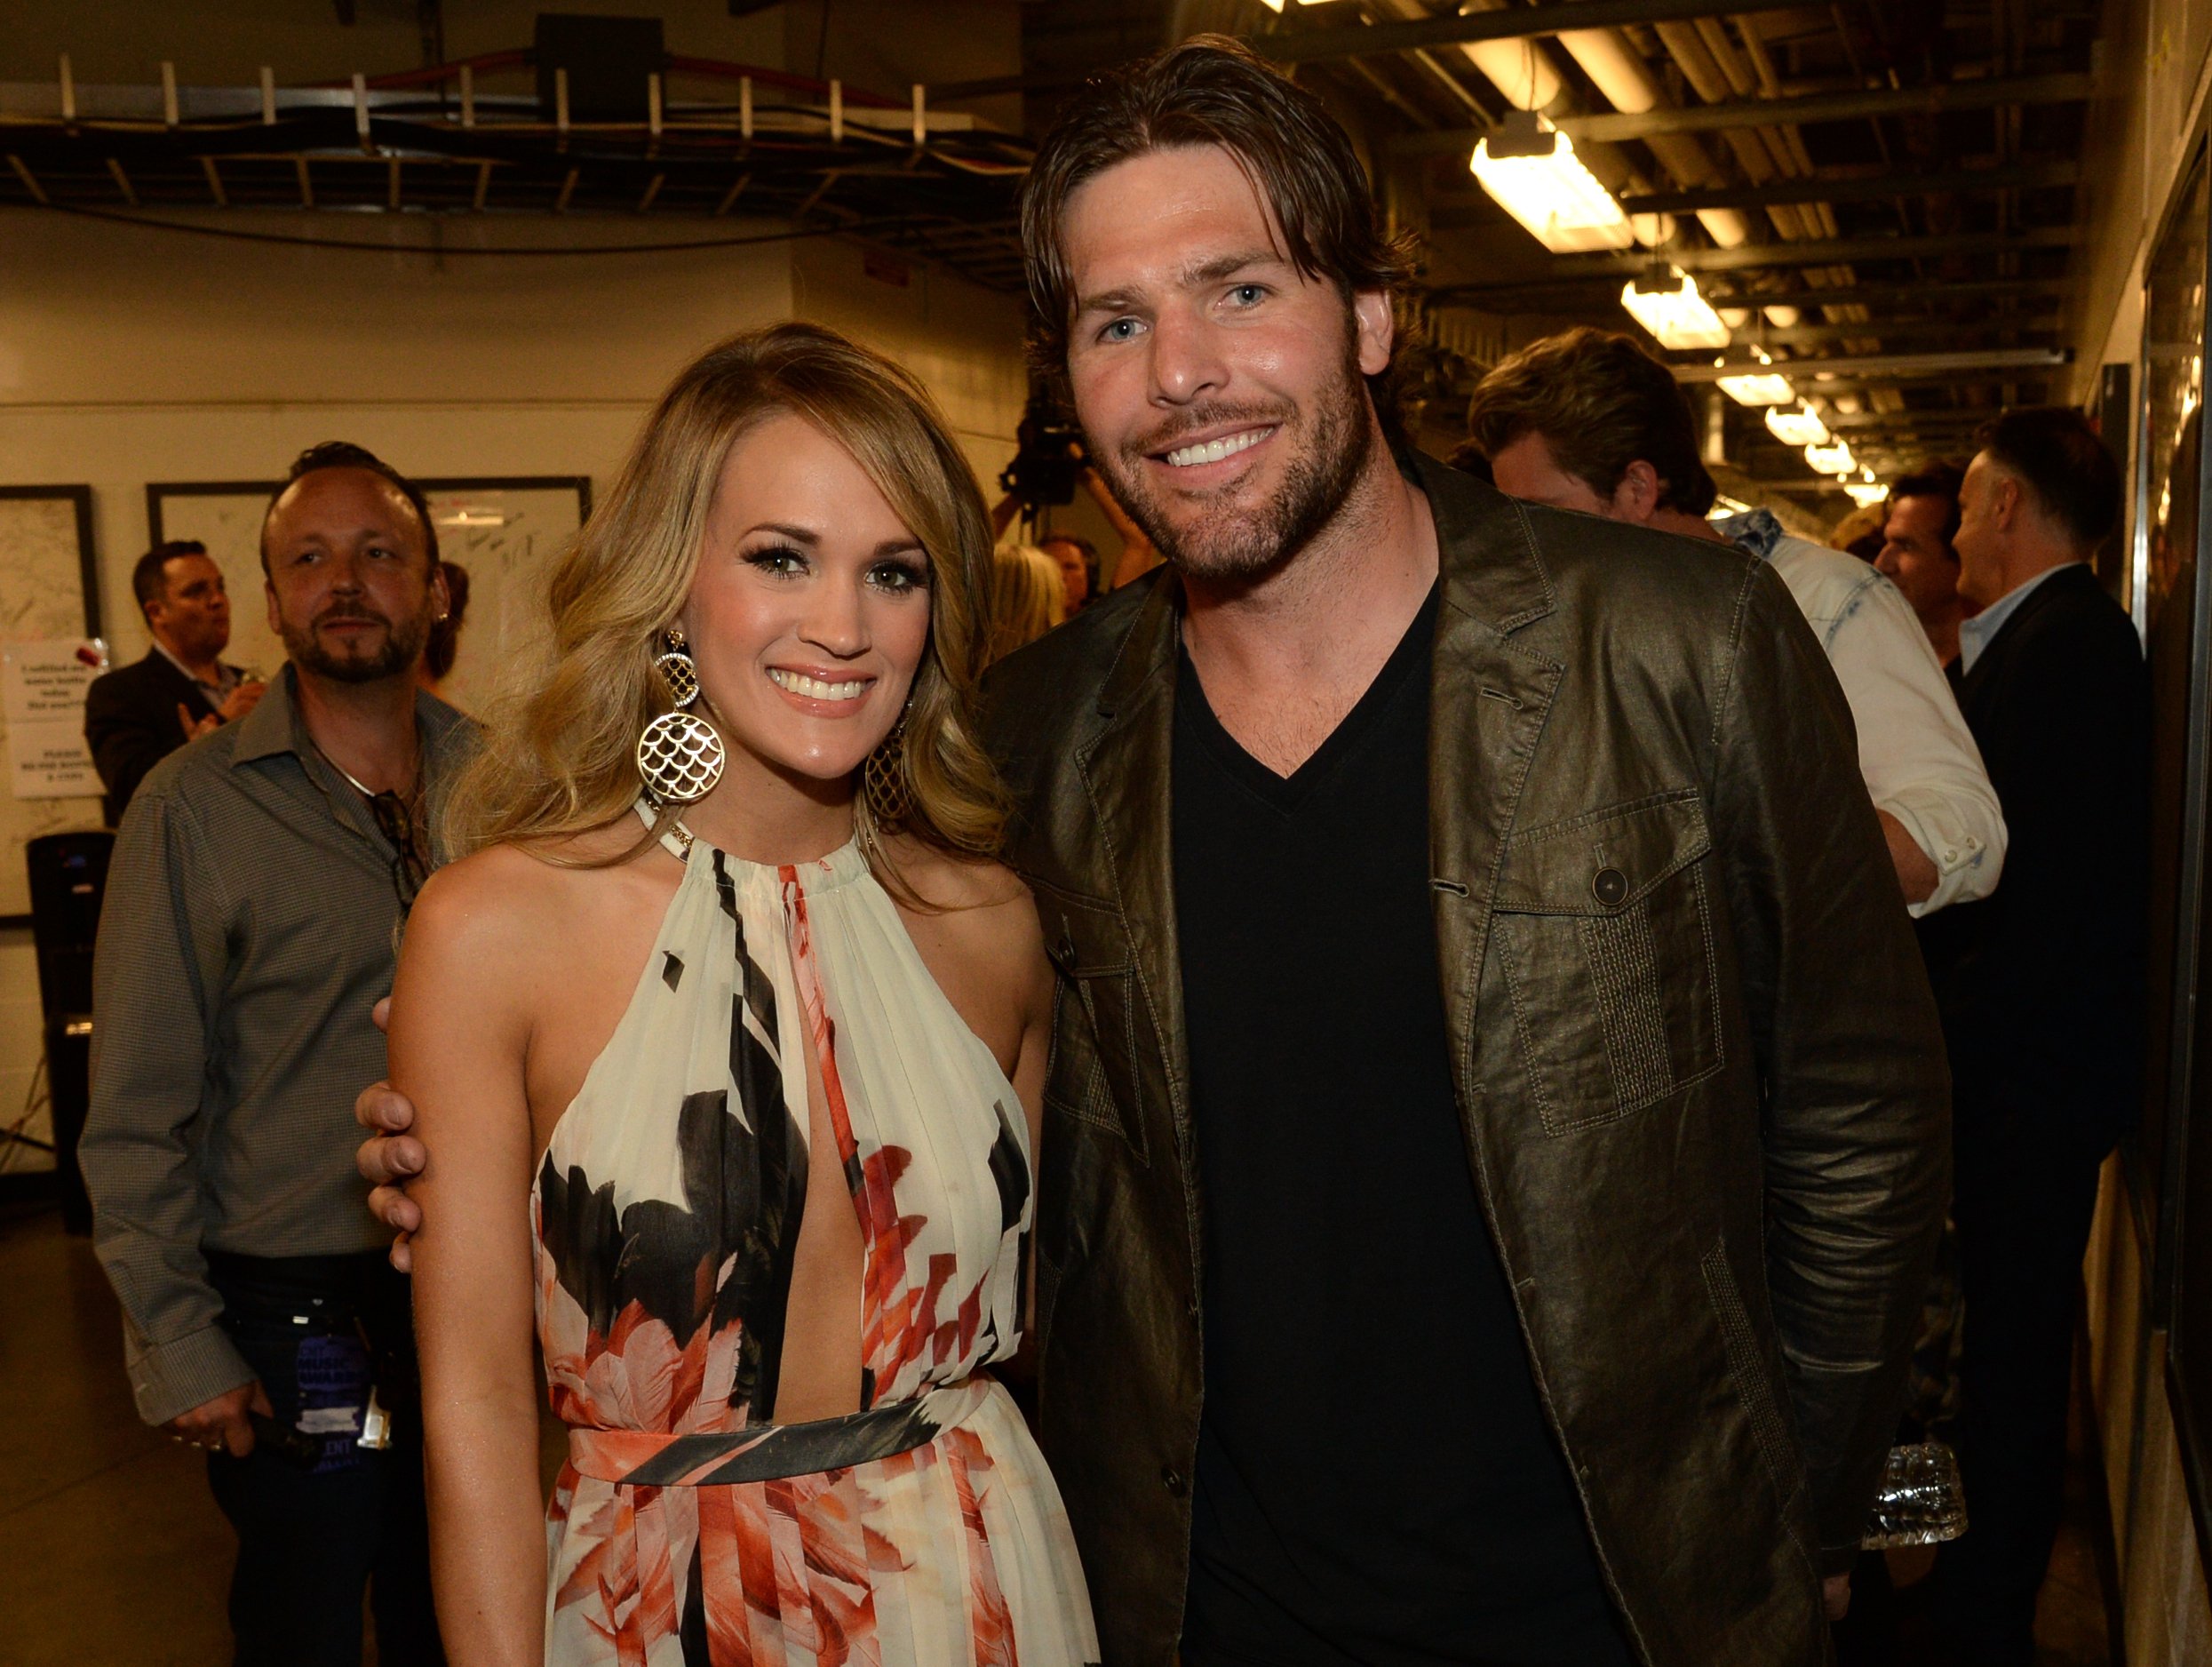  Carrie Underwood and Mike Fisher attend the 2014 CMT Music Awards on June 4, 2014, in Nashville, Tennessee. | Source: Getty Images.